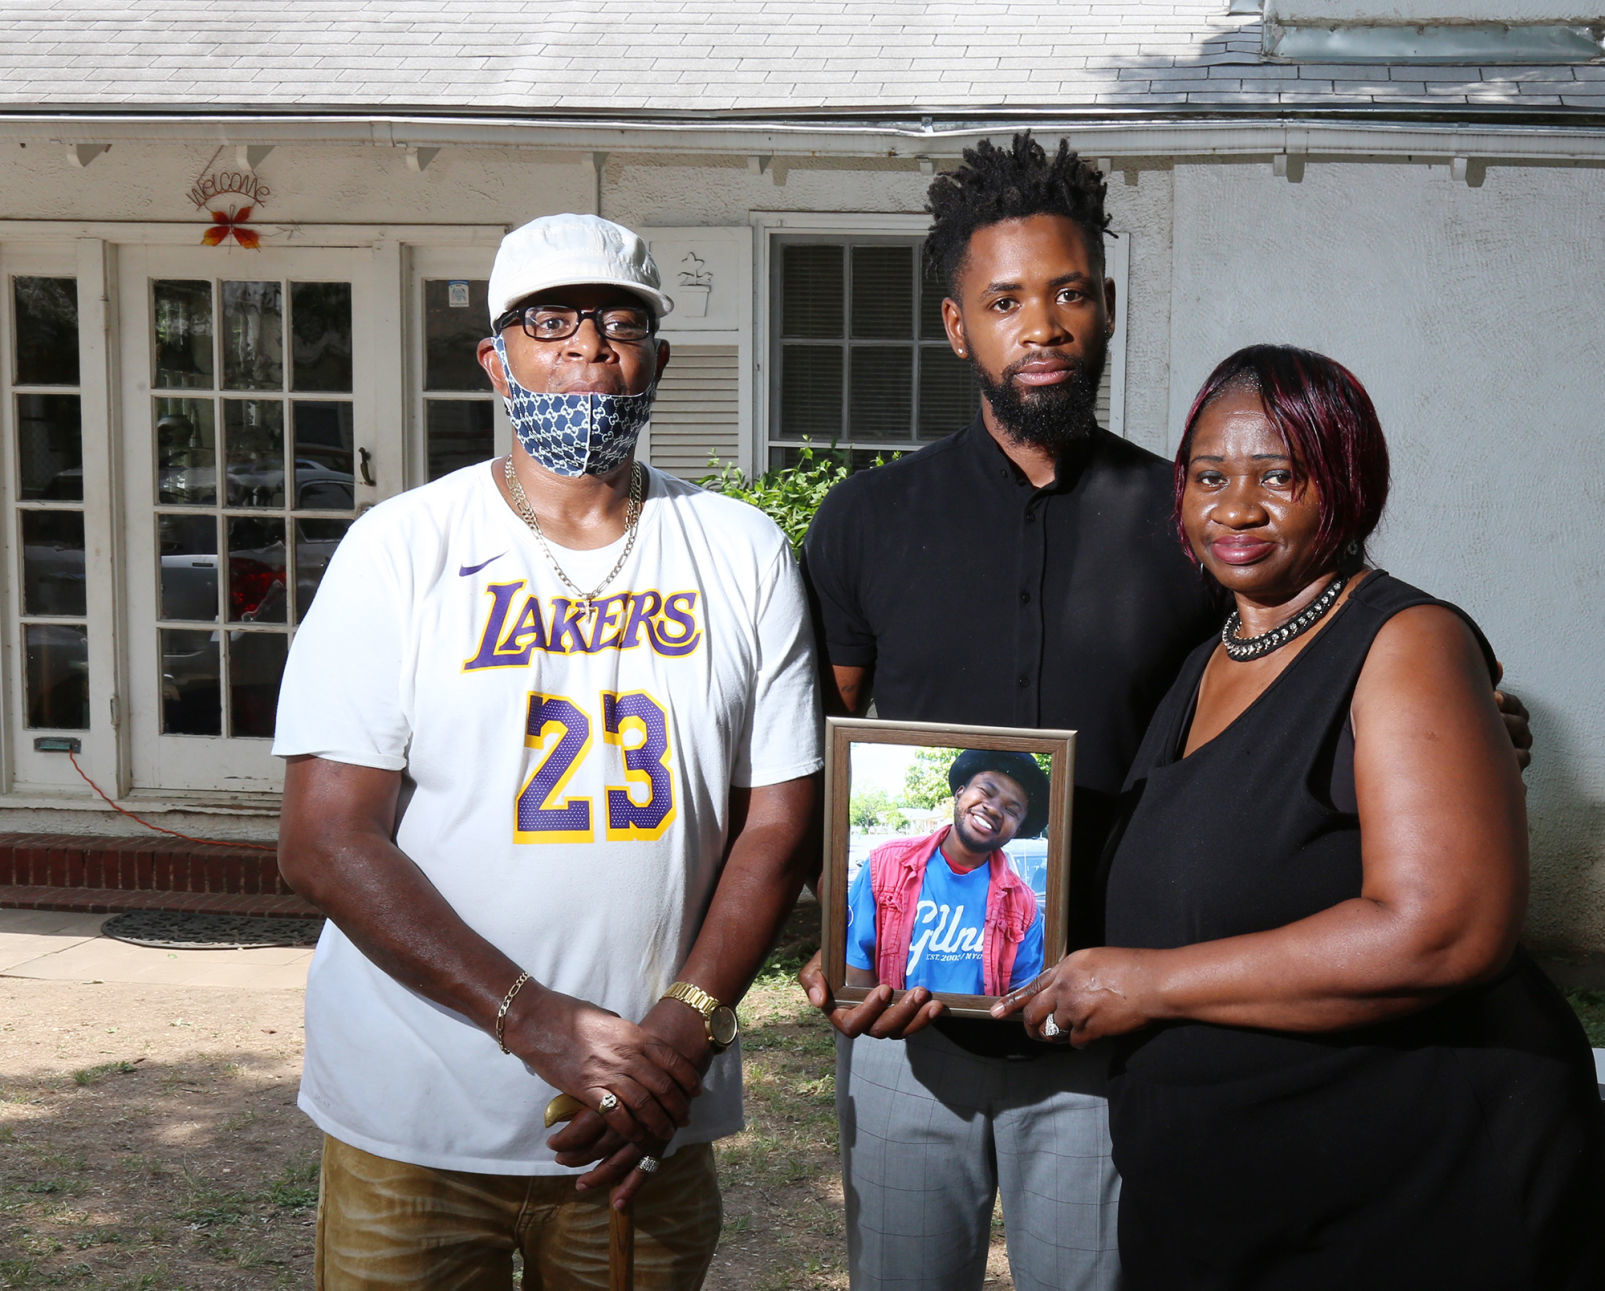 Waco mans near-fatal police encounter, wait in jail for mental health treatment highlight need for change, family says pic pic